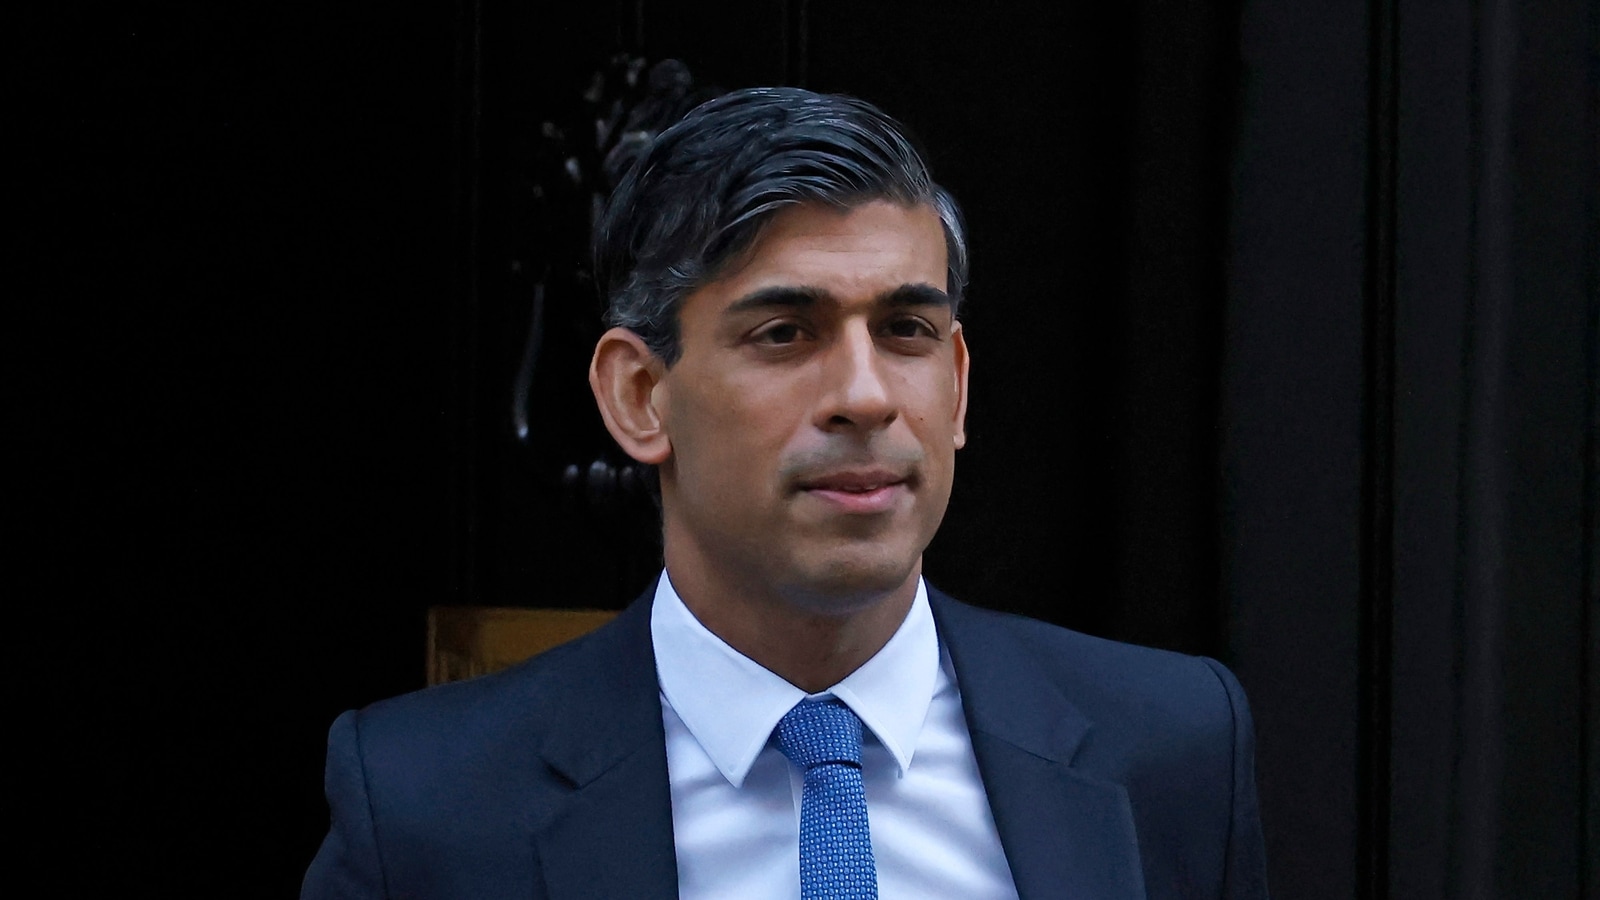 Politics, war and strikes: A look at Rishi Sunak's 100 days as UK prime minister